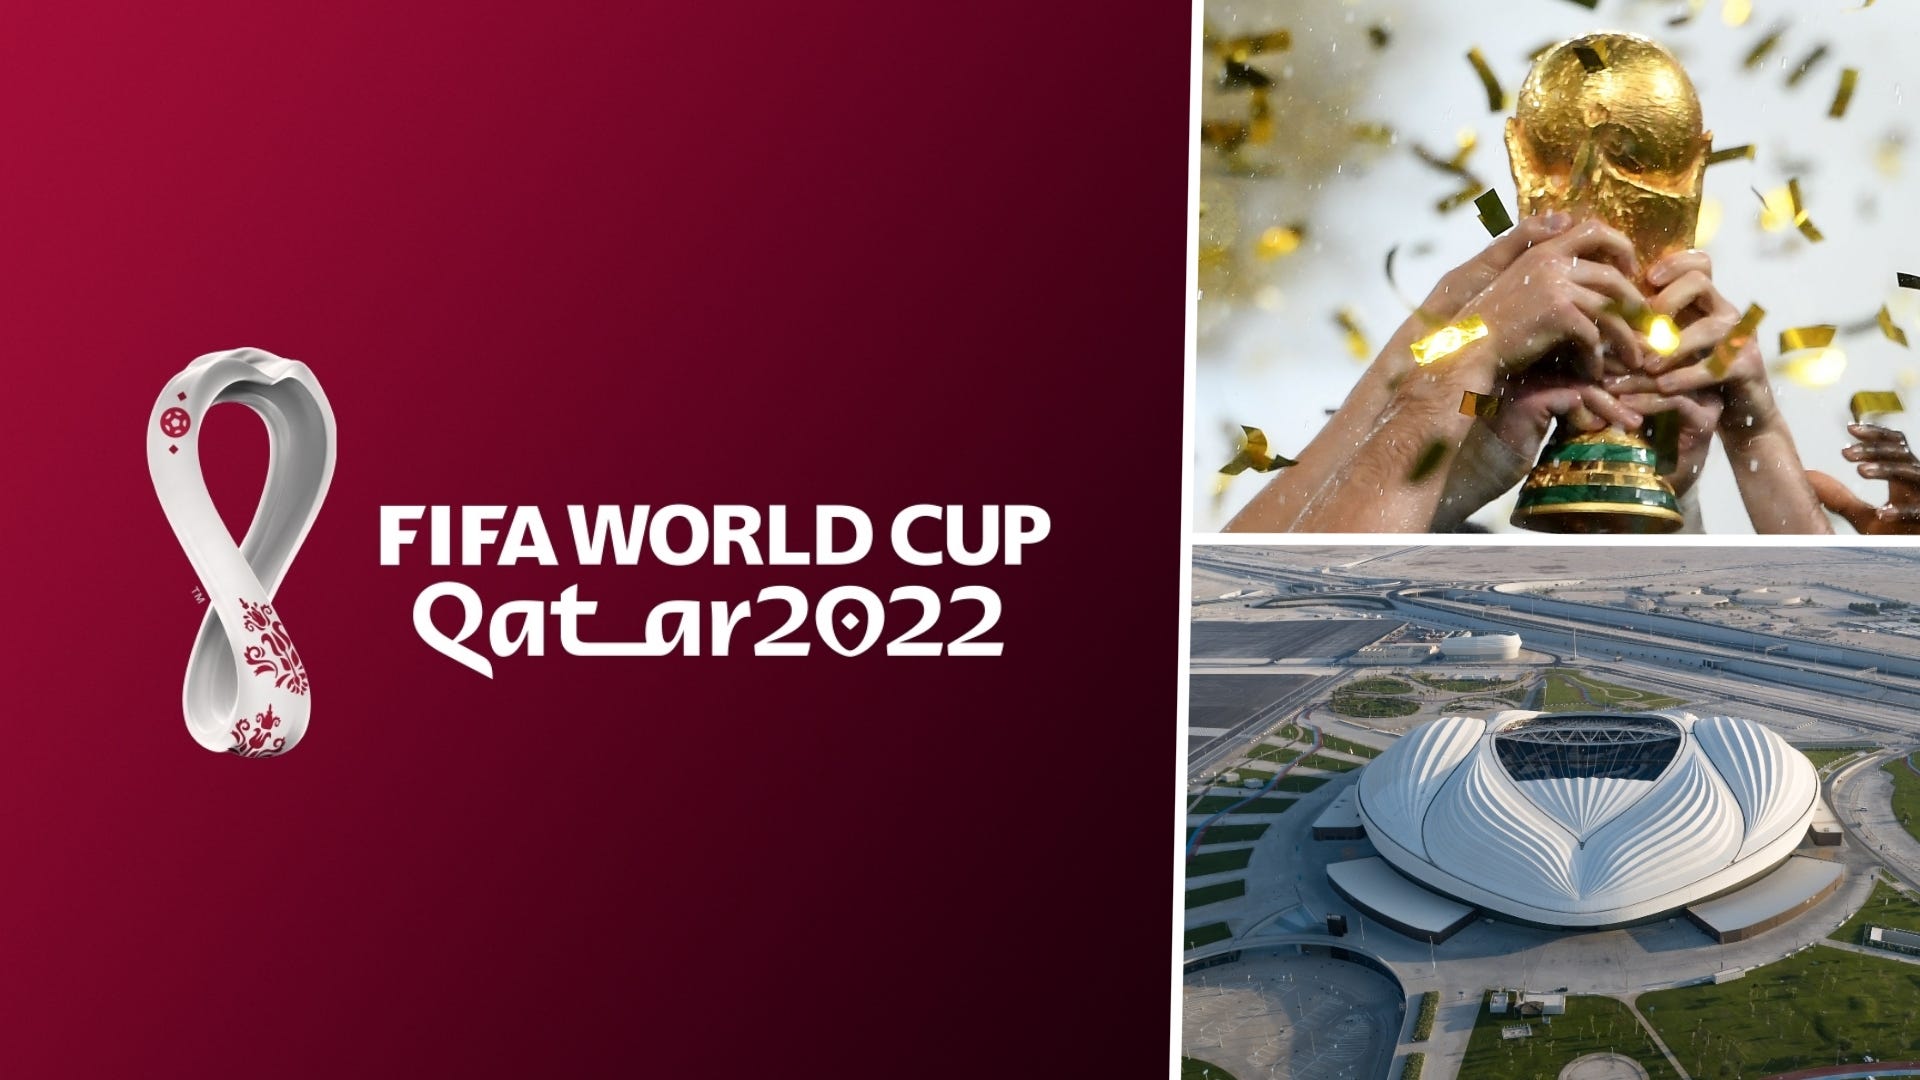 World Cup 2022 qualifiers When are the Europe, South America, North America, Africa, Asia and Oceania group stage qualifiers? Goal US